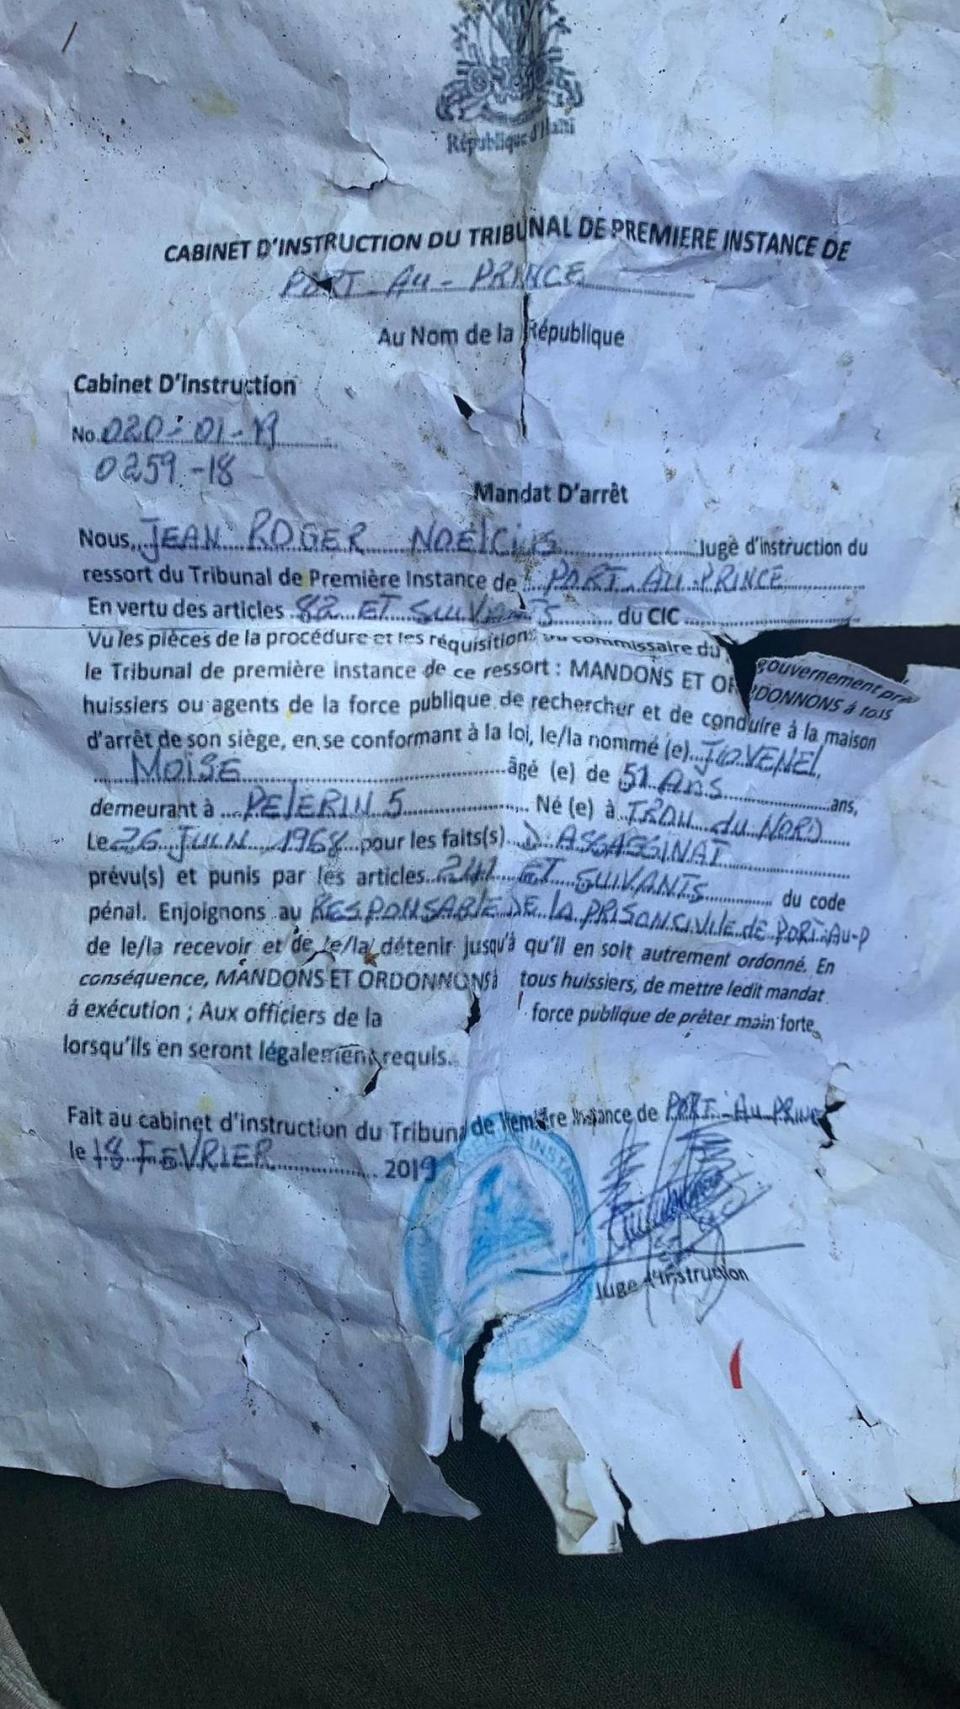 The pretext for the ‘arrest’ of Haiti President Jovenel Moïse was a dubious 2019 warrant issued against Moïse ‘for assassination’ by Investigative Judge Jean Roger Noelcius. A crumbled copy of the warrant was found in one of the homes occupied by some of the suspects in Port-au-Prince.